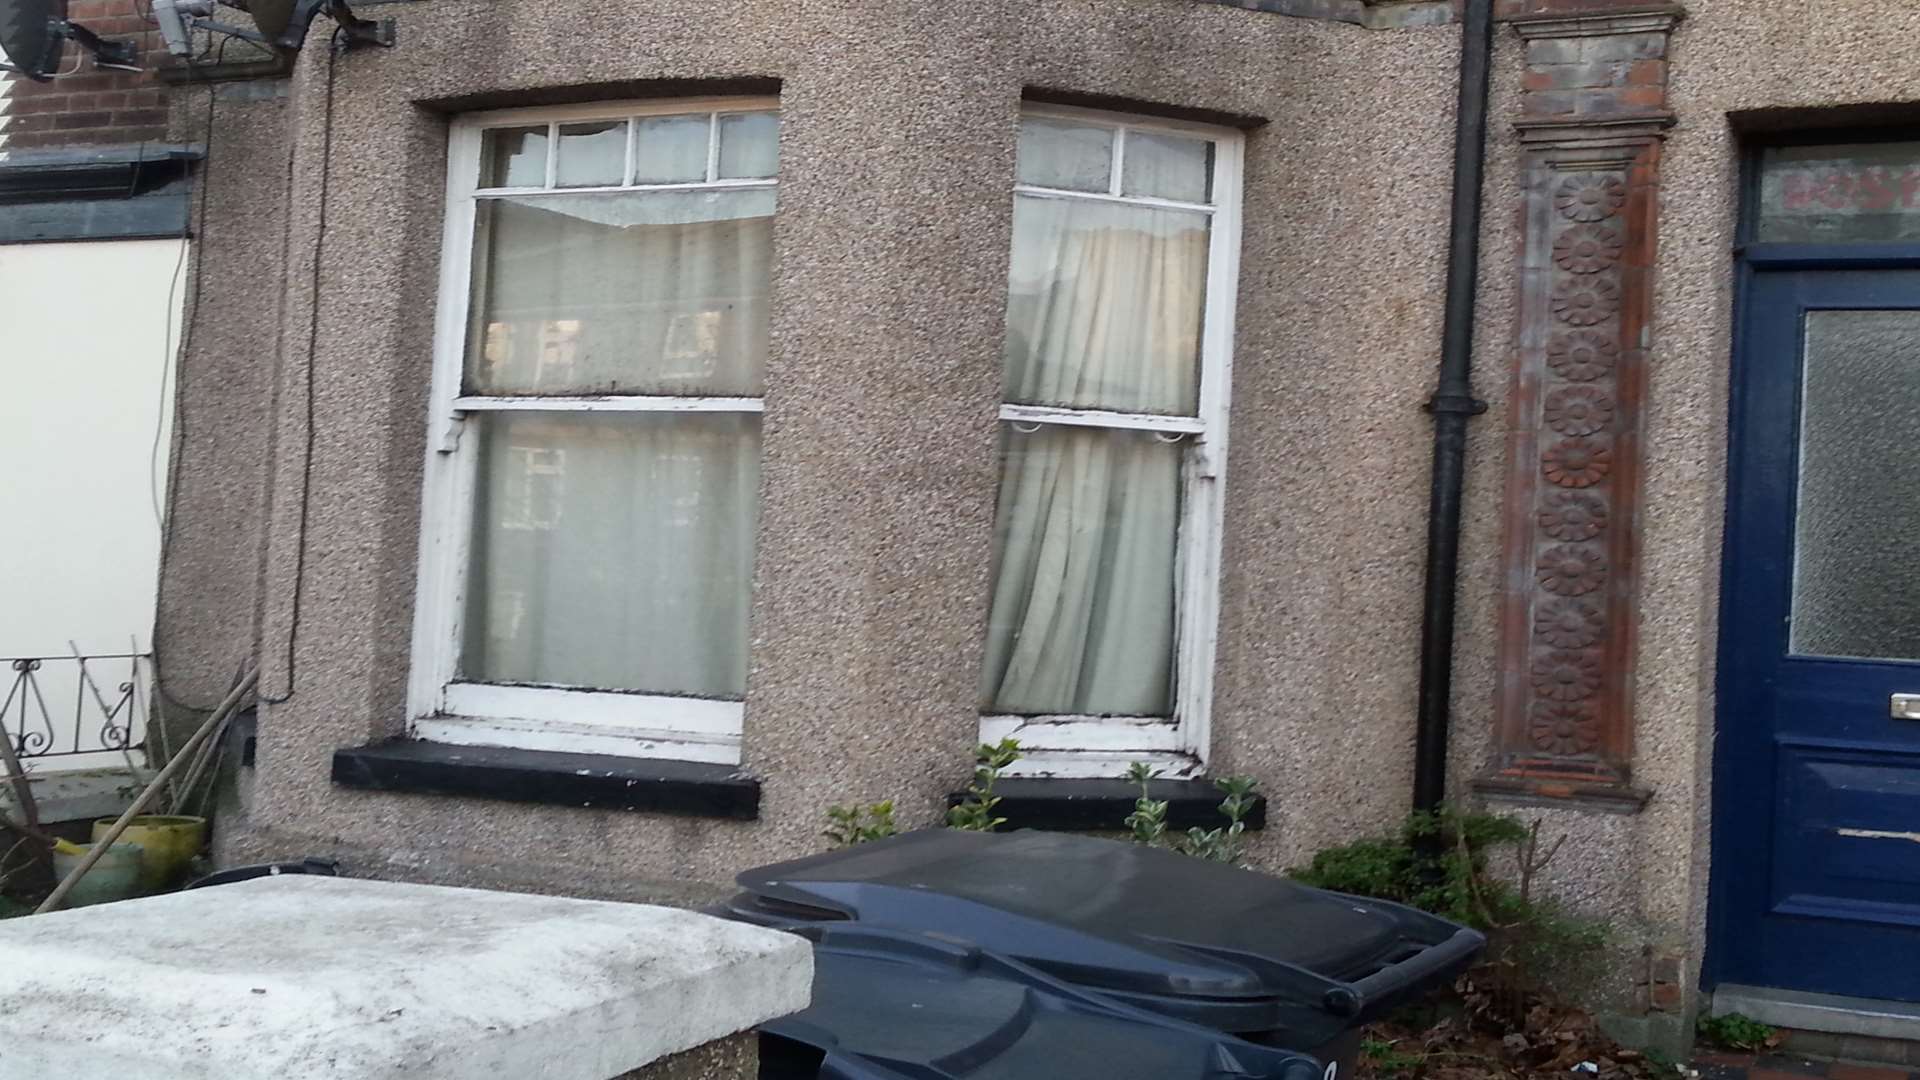 A man was rescued from this ground floor flat